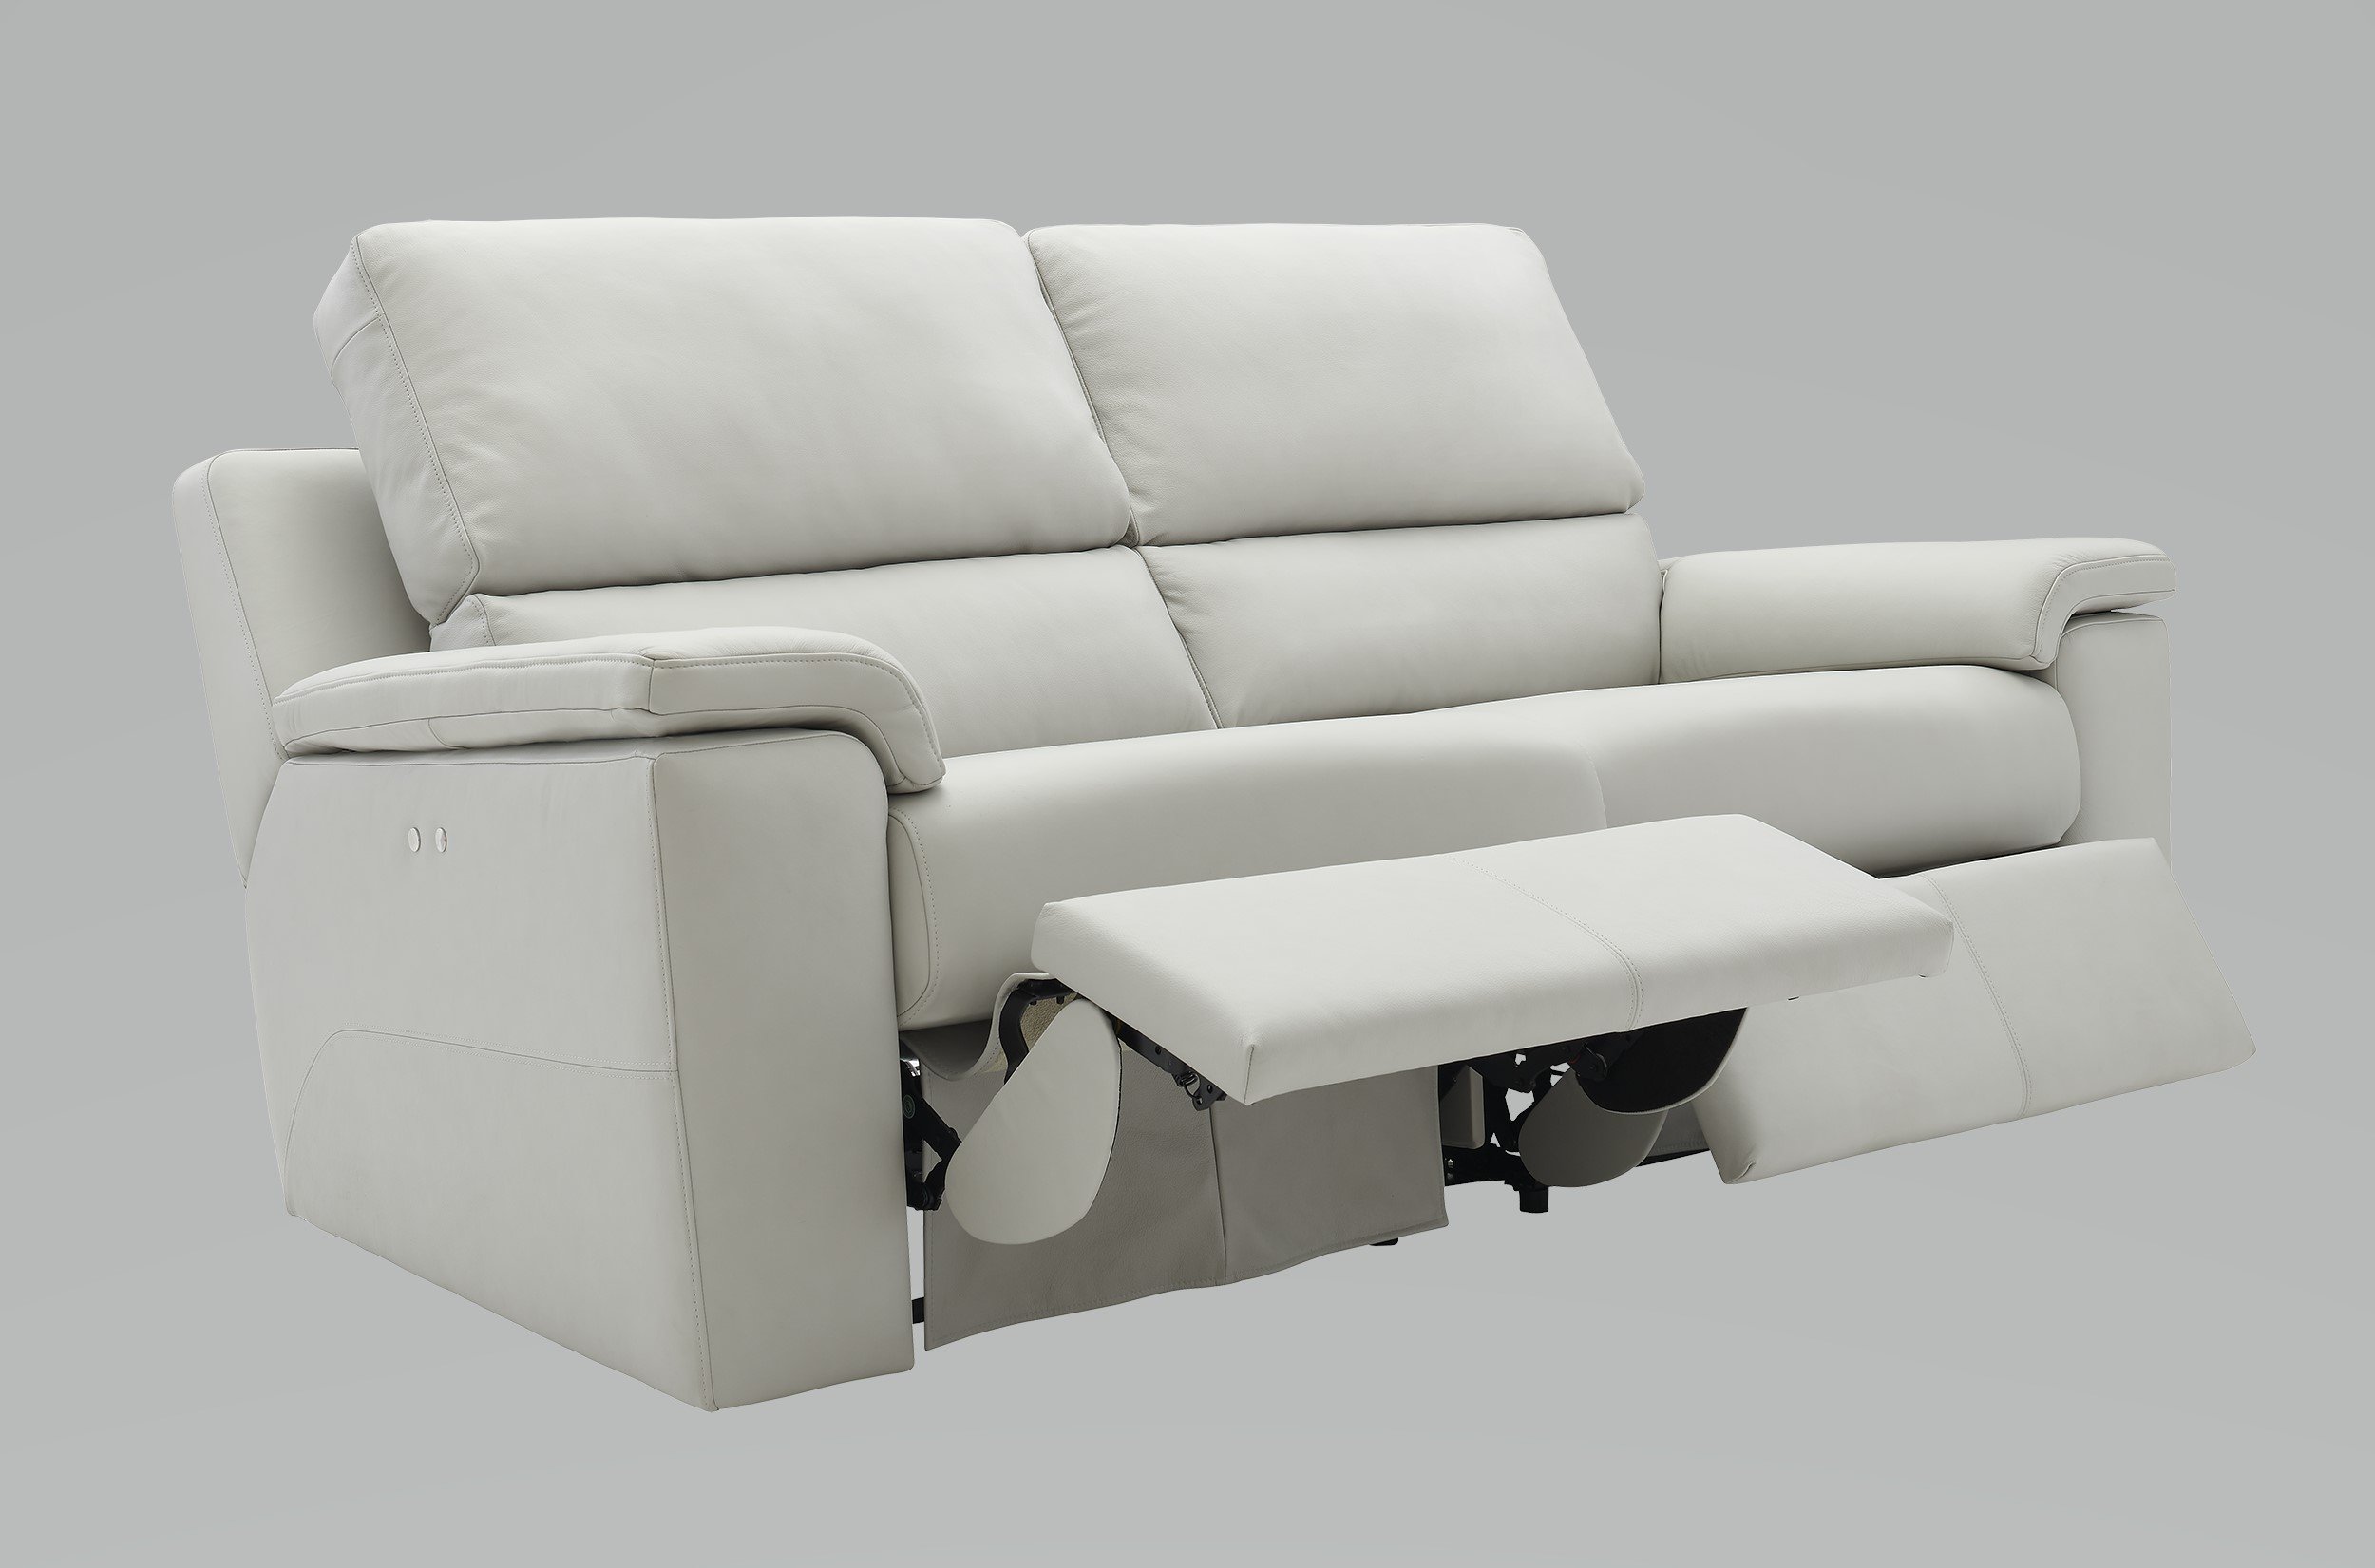 taylor 3 seater leather sofa price